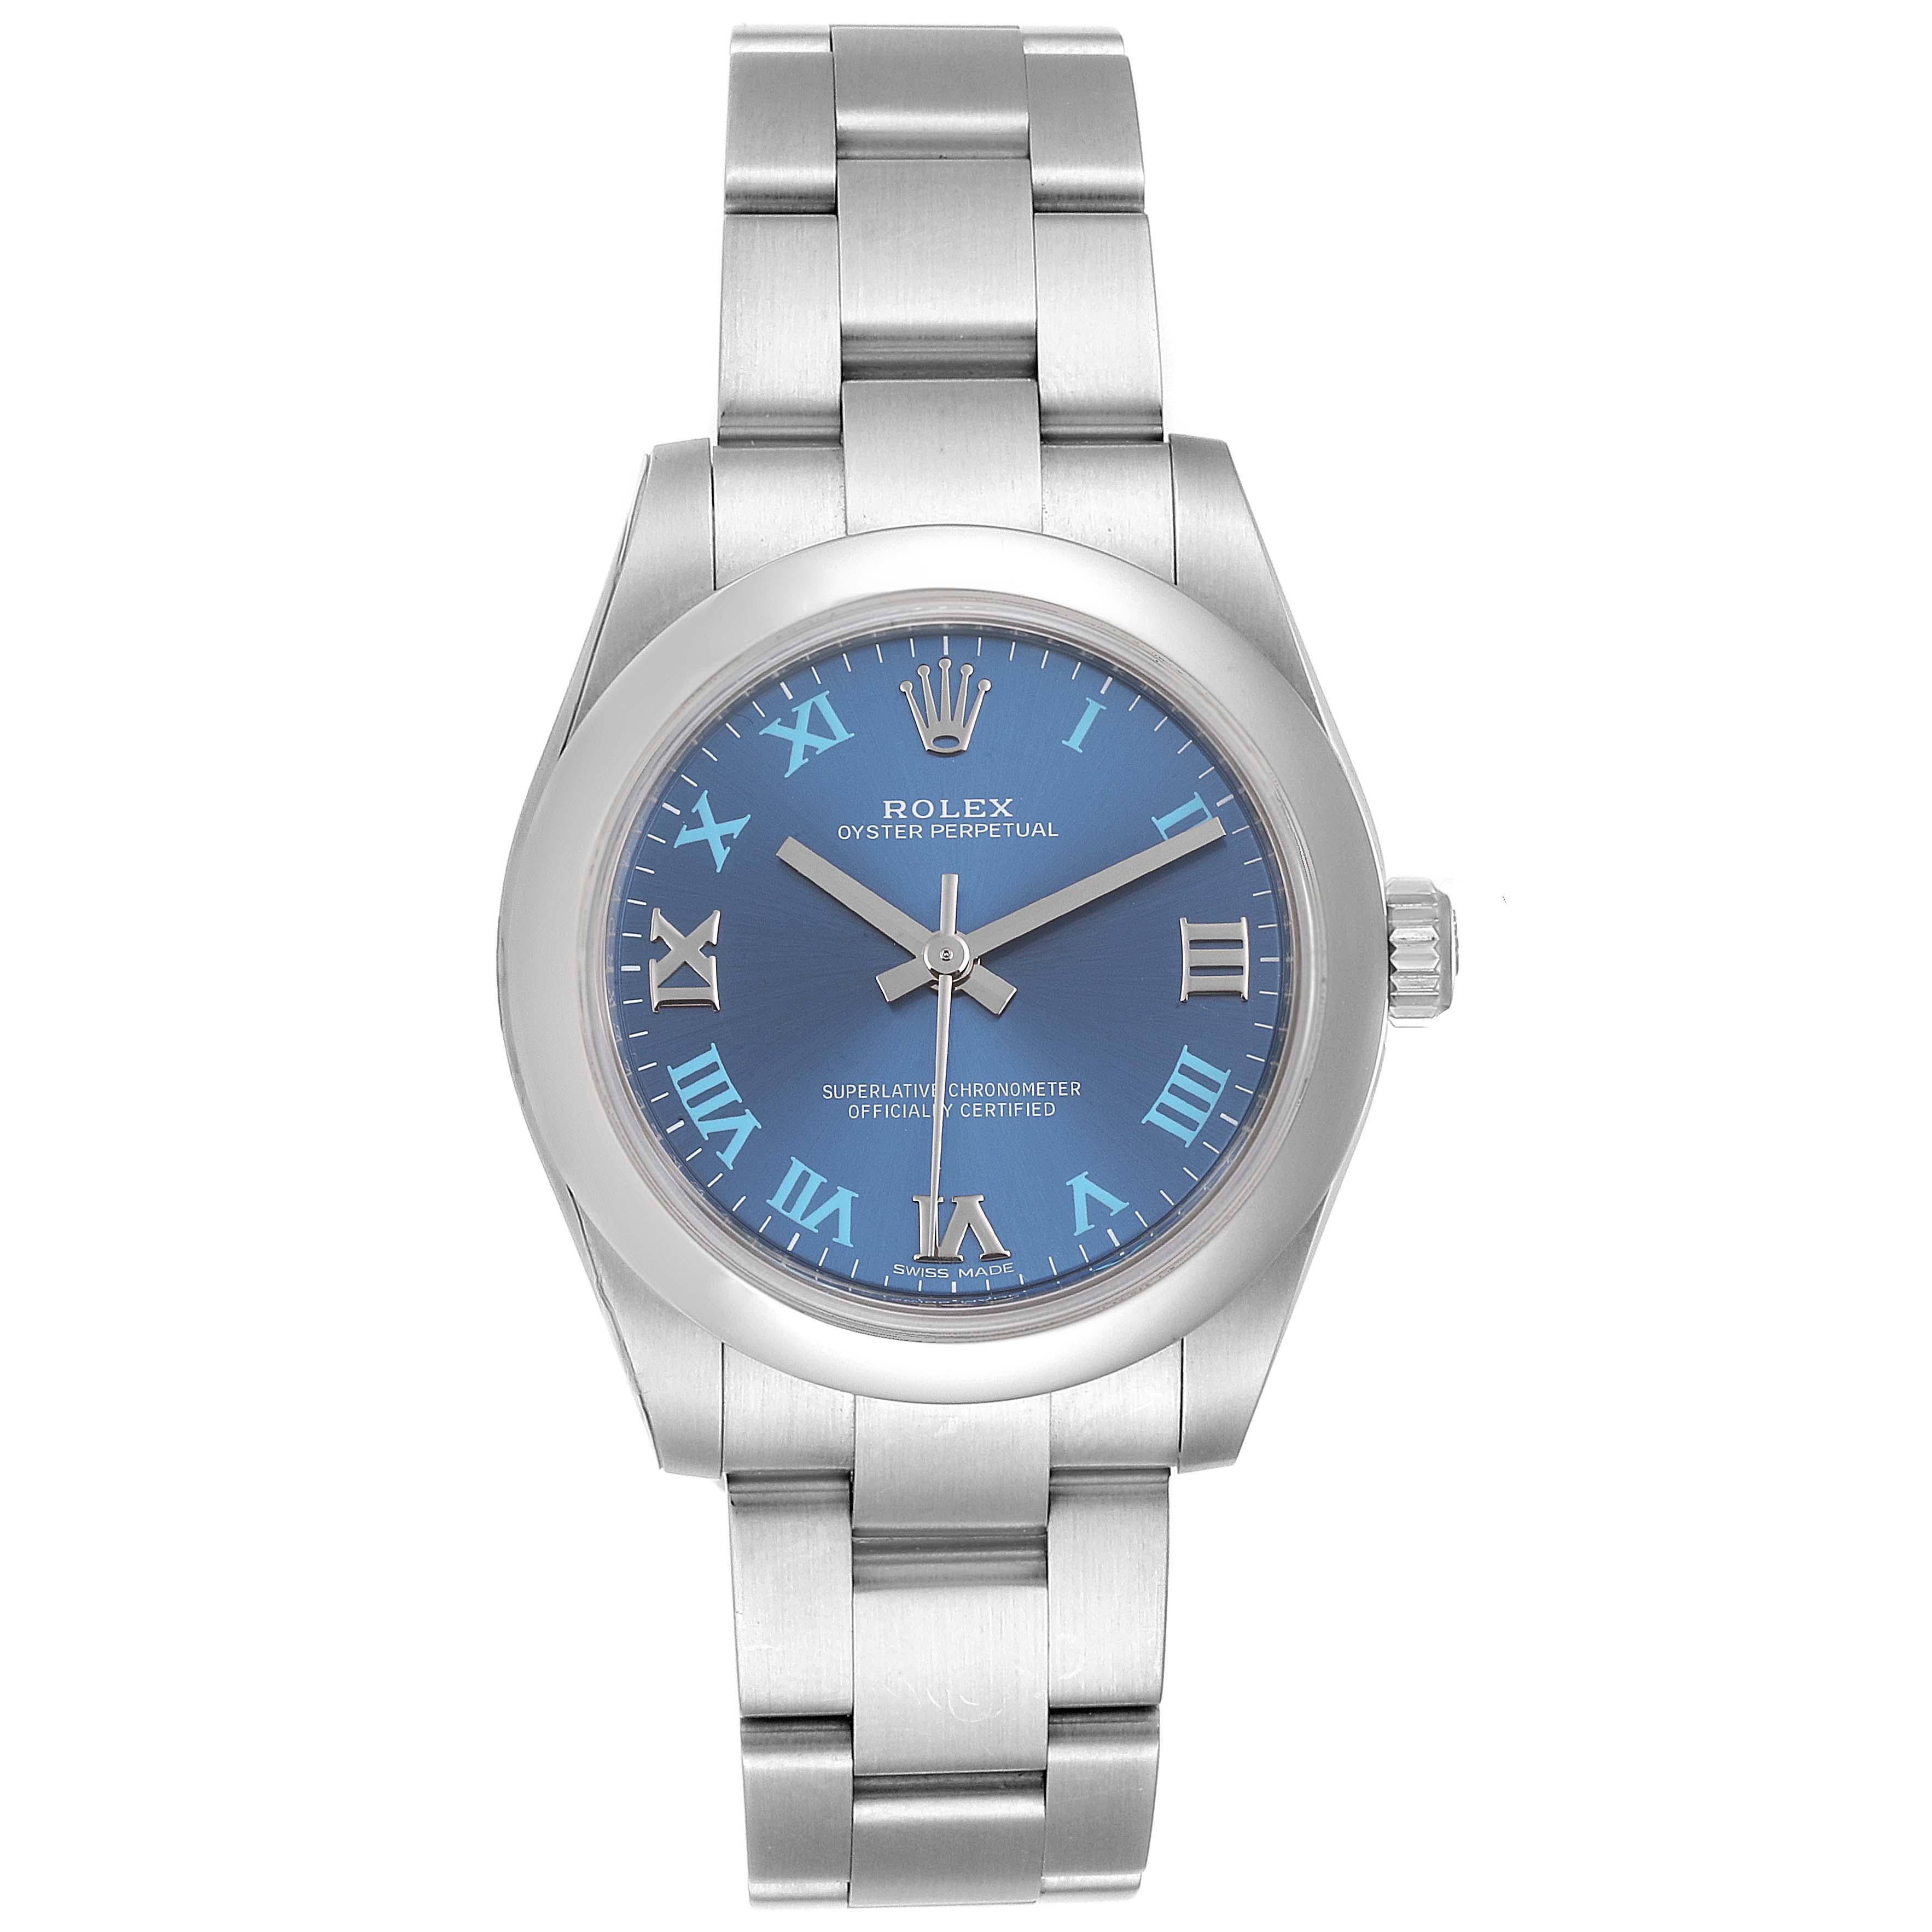 Rolex Oyster Perpetual Midsize 31 Blue Dial Ladies Watch 177200 Unworn. Officially certified chronometer self-winding movement. Stainless steel oyster case 31.0 mm in diameter. Rolex logo on a crown. Stainless steel smooth domed bezel. Scratch